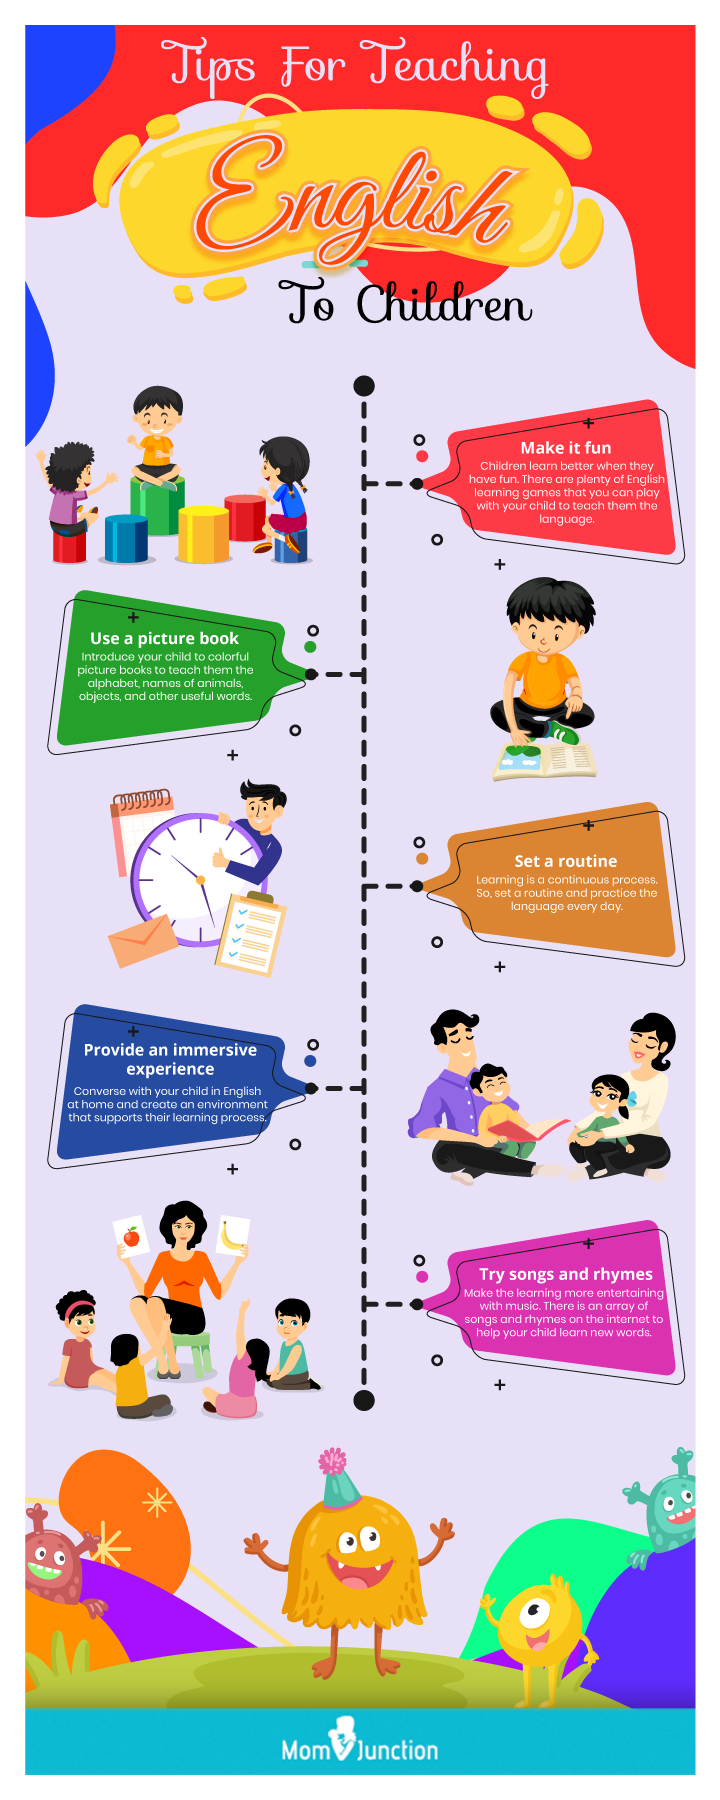 tips for teaching english to children [infographic]